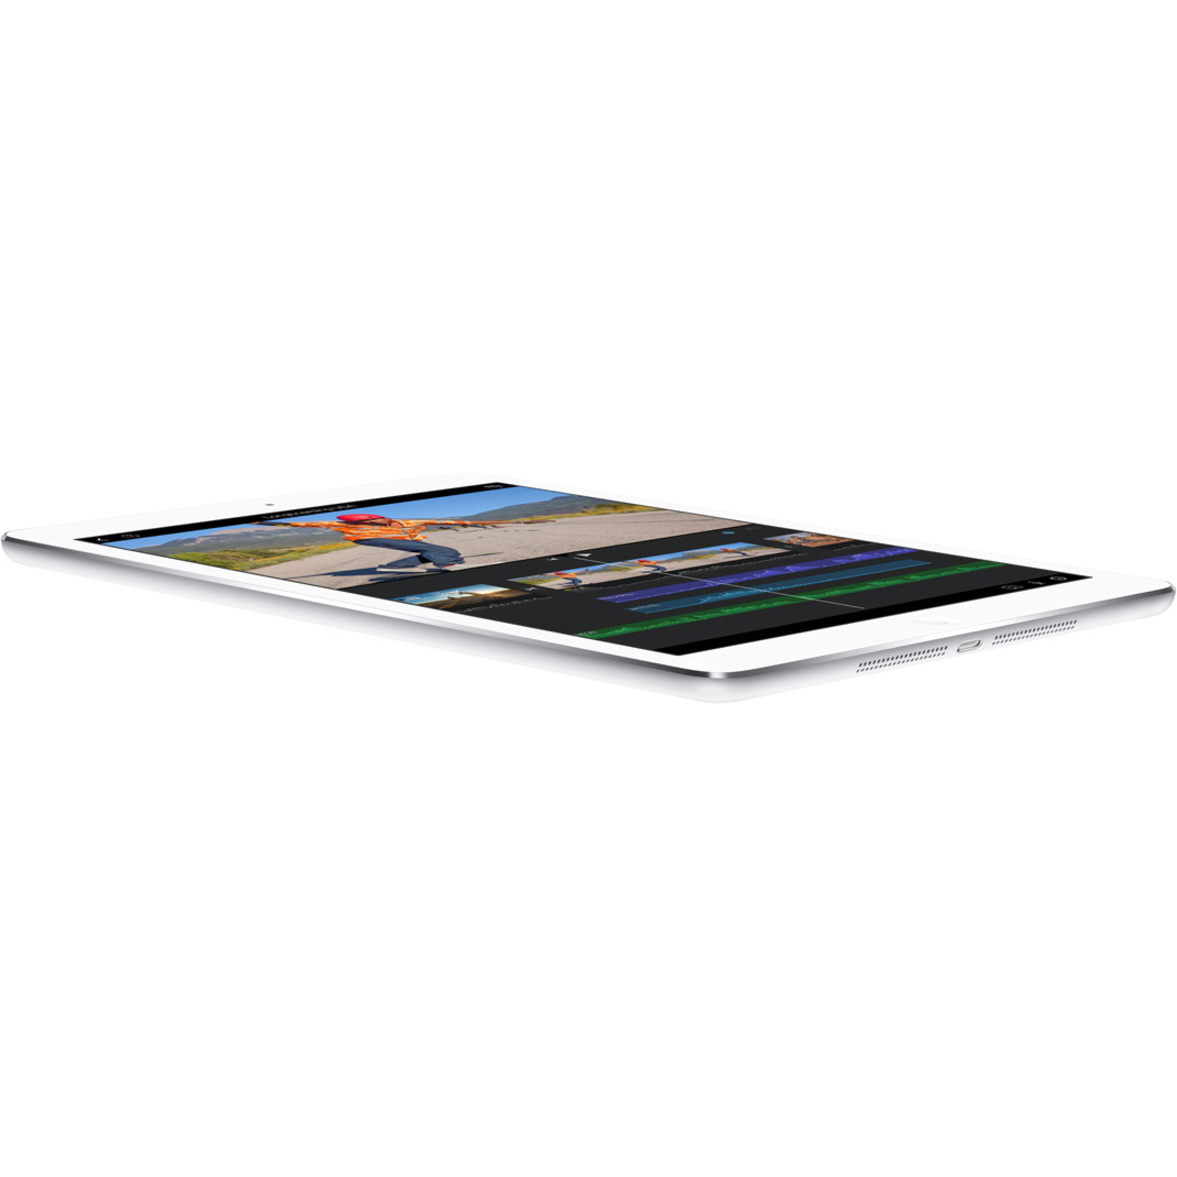 Apple iPad Air MF021LL/A Tablet, 9.7" QXGA, Cyclone Dual-core (2 Core) 1.30 GHz, 16 GB Storage, iOS 7, Silver - image 4 of 6